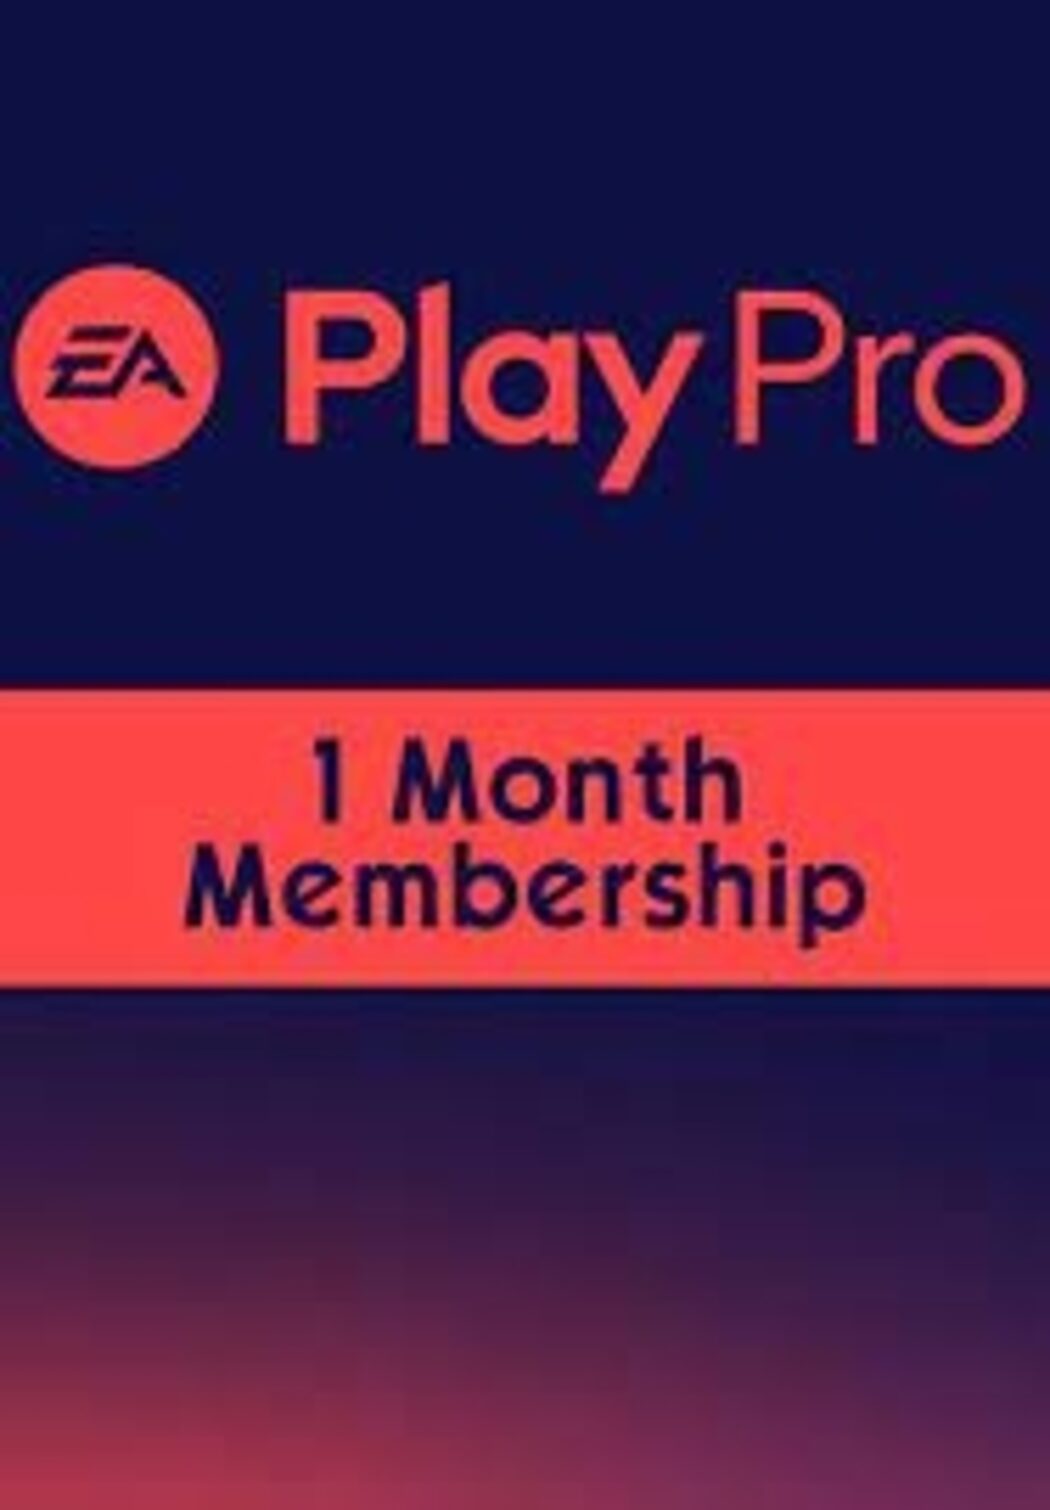 Buy cheap EA Play for Xbox - 12 Months key - lowest price